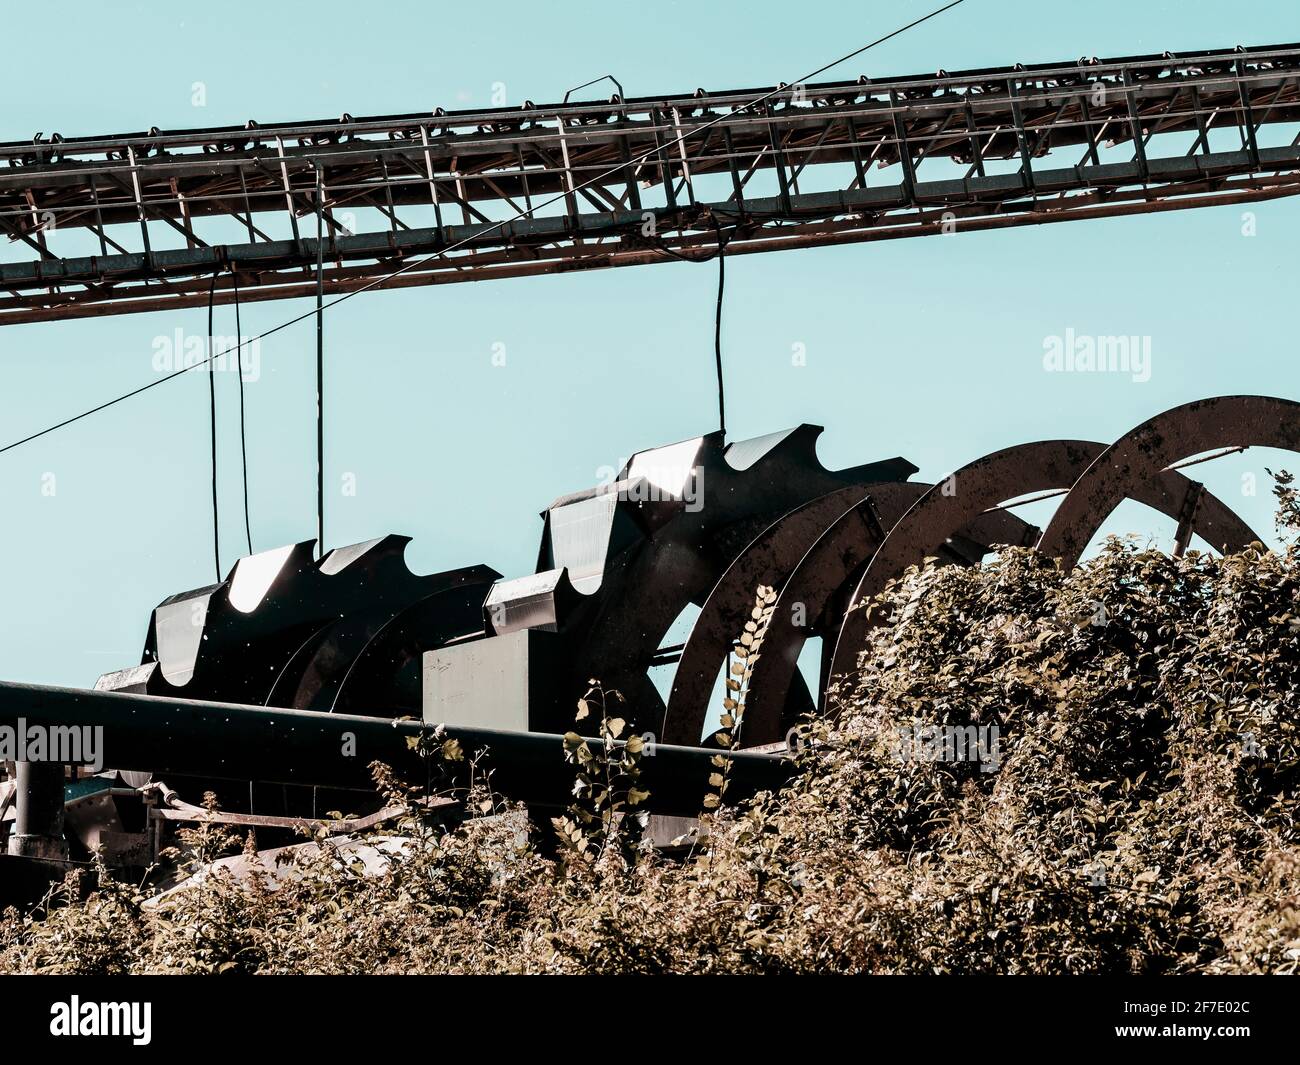 A plant for the production of crushed stone, gravel and sand. Quarry, machines and conveyors. Stock Photo